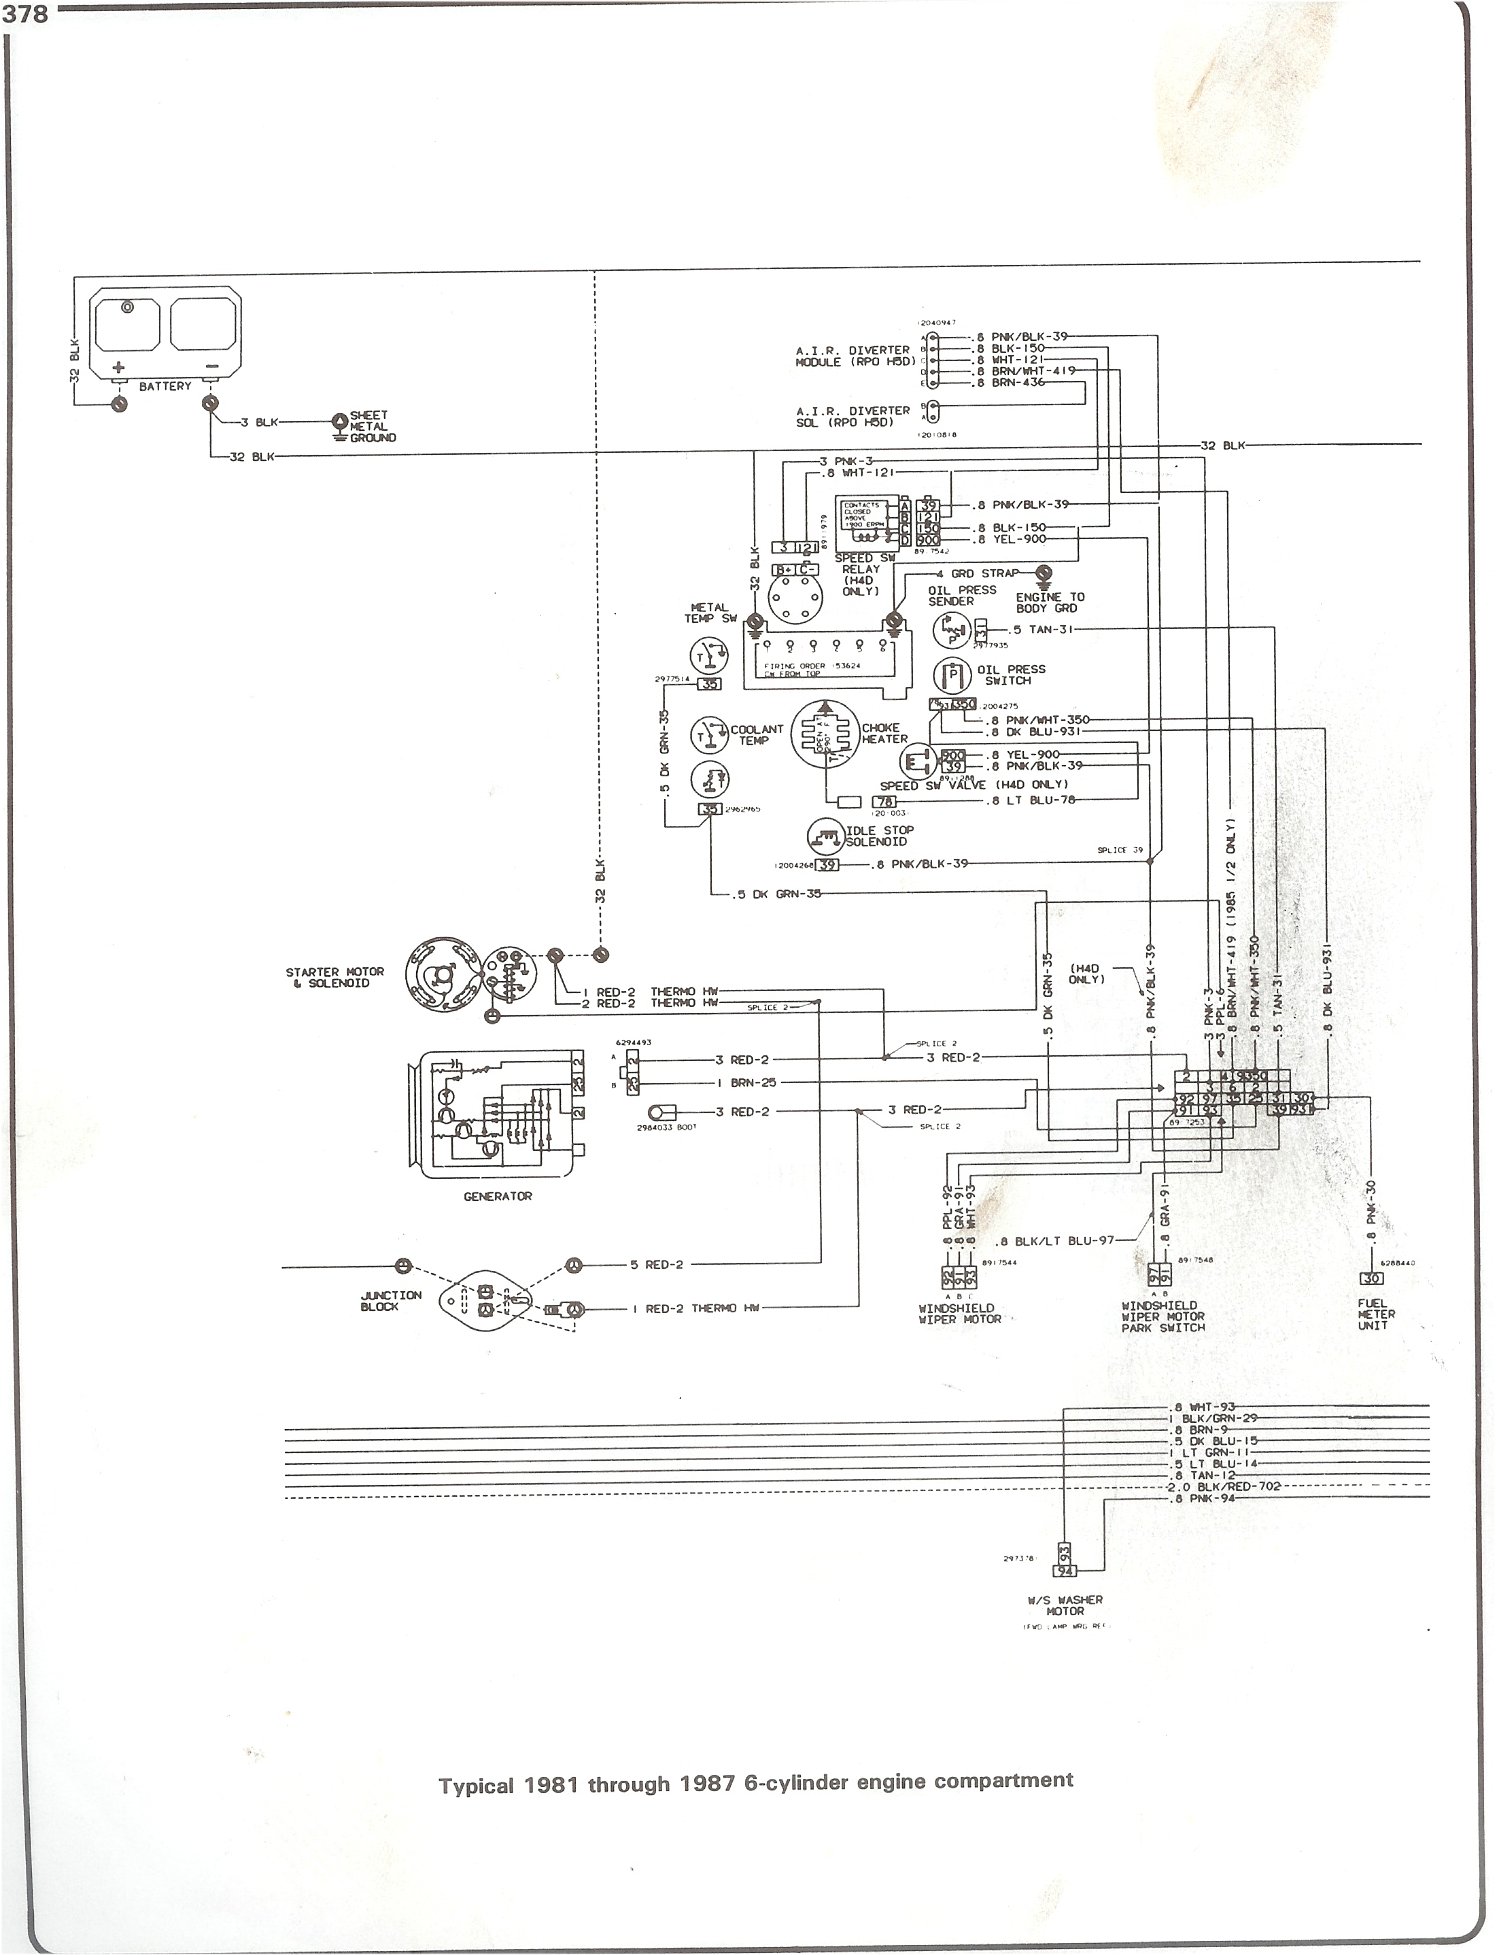 45c2b7 C Wiring Diagrams Site 73 87 Chevy K20 Wiring Resources